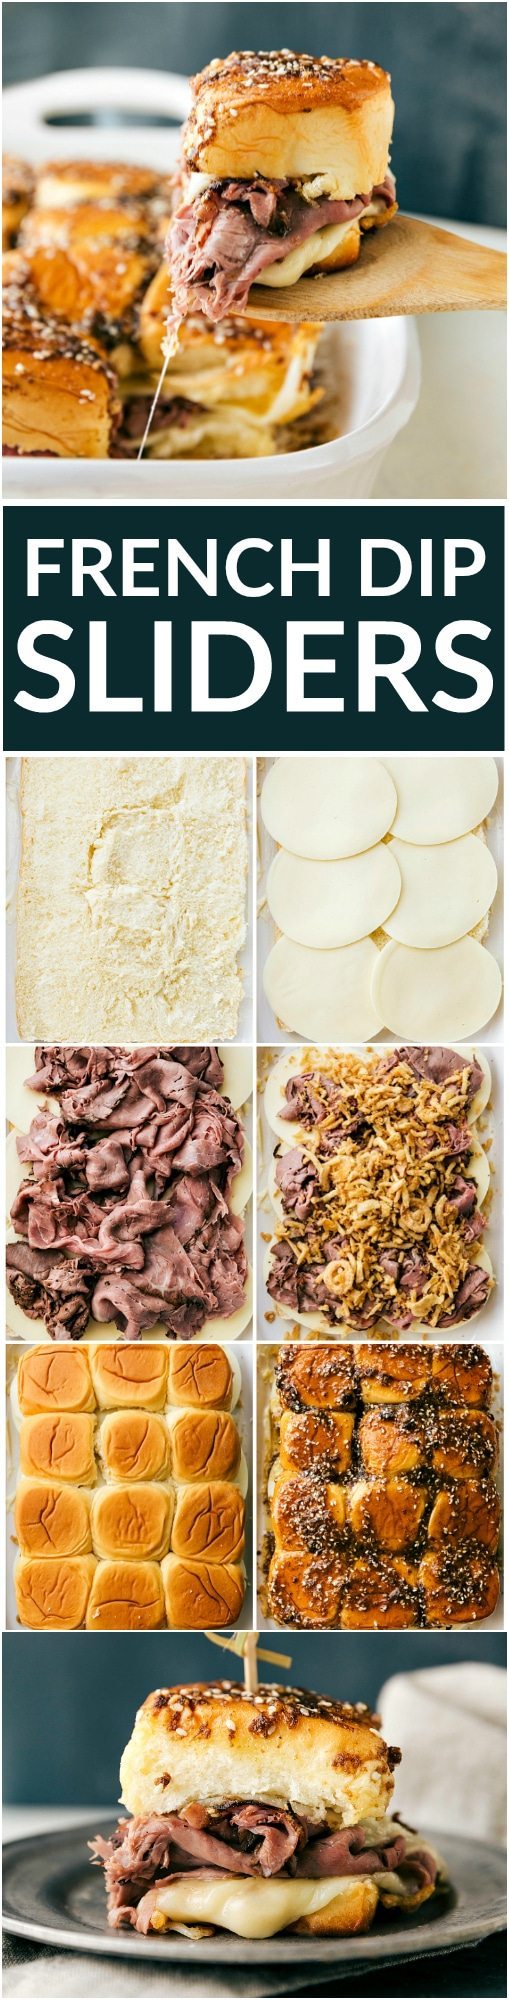 The best possible version of French Dip sandwiches -- made into oven-baked sliders! These French Dip sliders take only TEN MINUTES PREP! via chelseasmessyapron.com